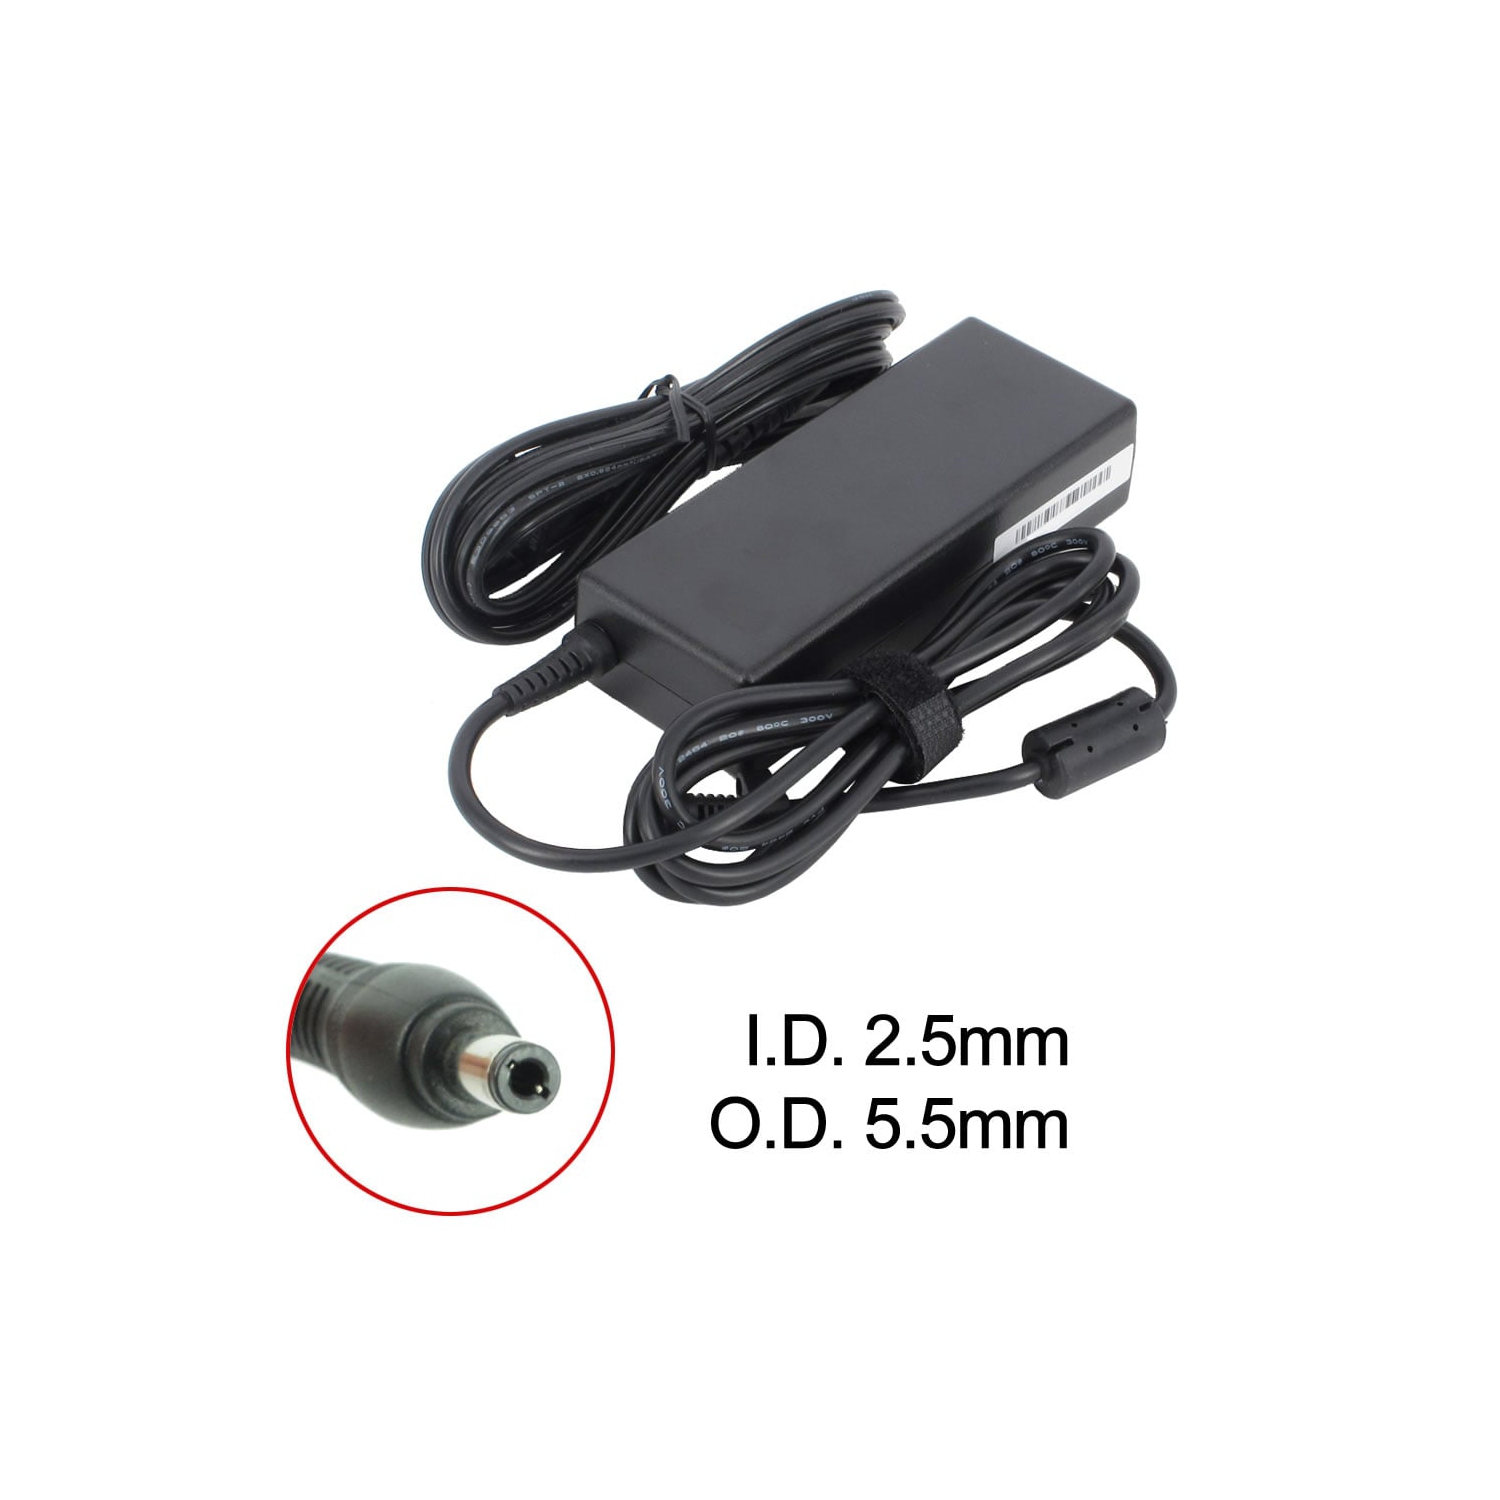 BATTDEPOT New Laptop AC Adapter for NEC LL700/3D 103942 808-875692-010A 9T458 ADP-65 HB BBEF PA-1900-36 SA80-3115